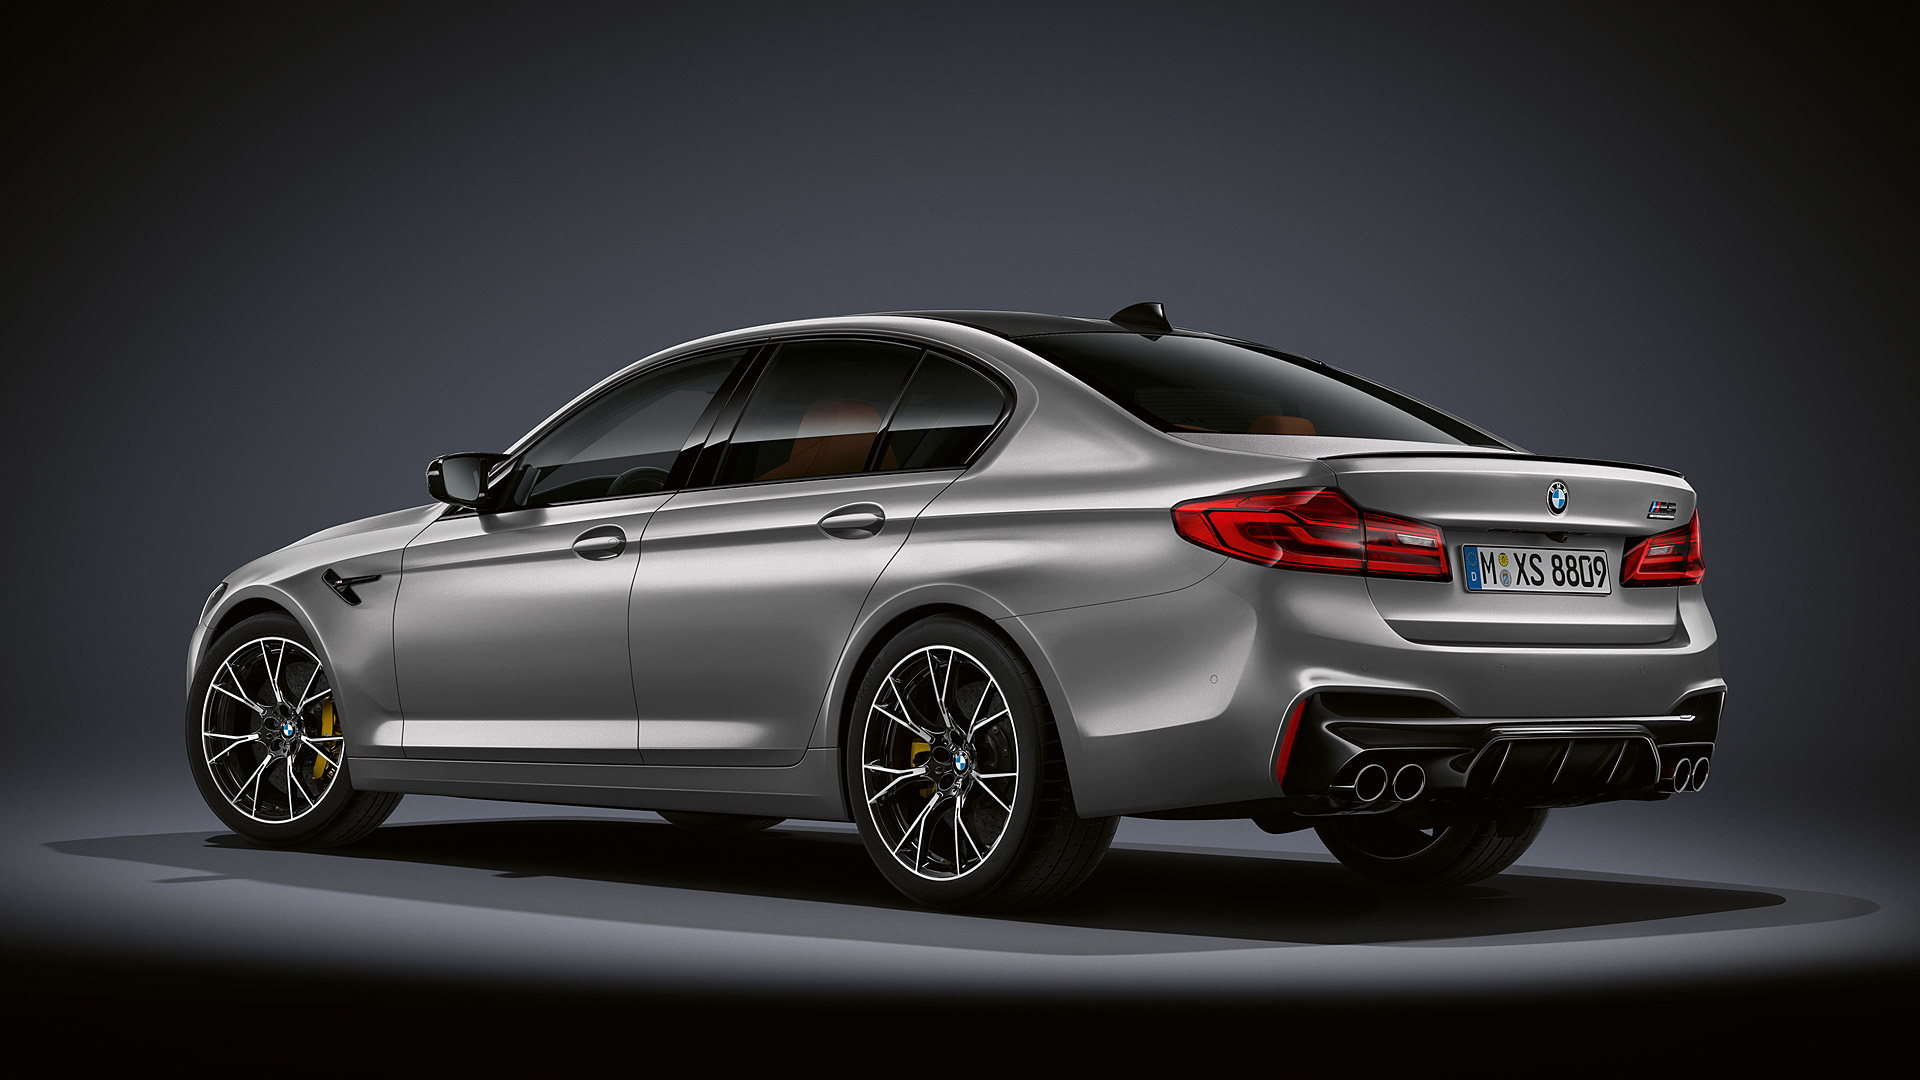  2019 BMW M5 Competition Wallpaper.